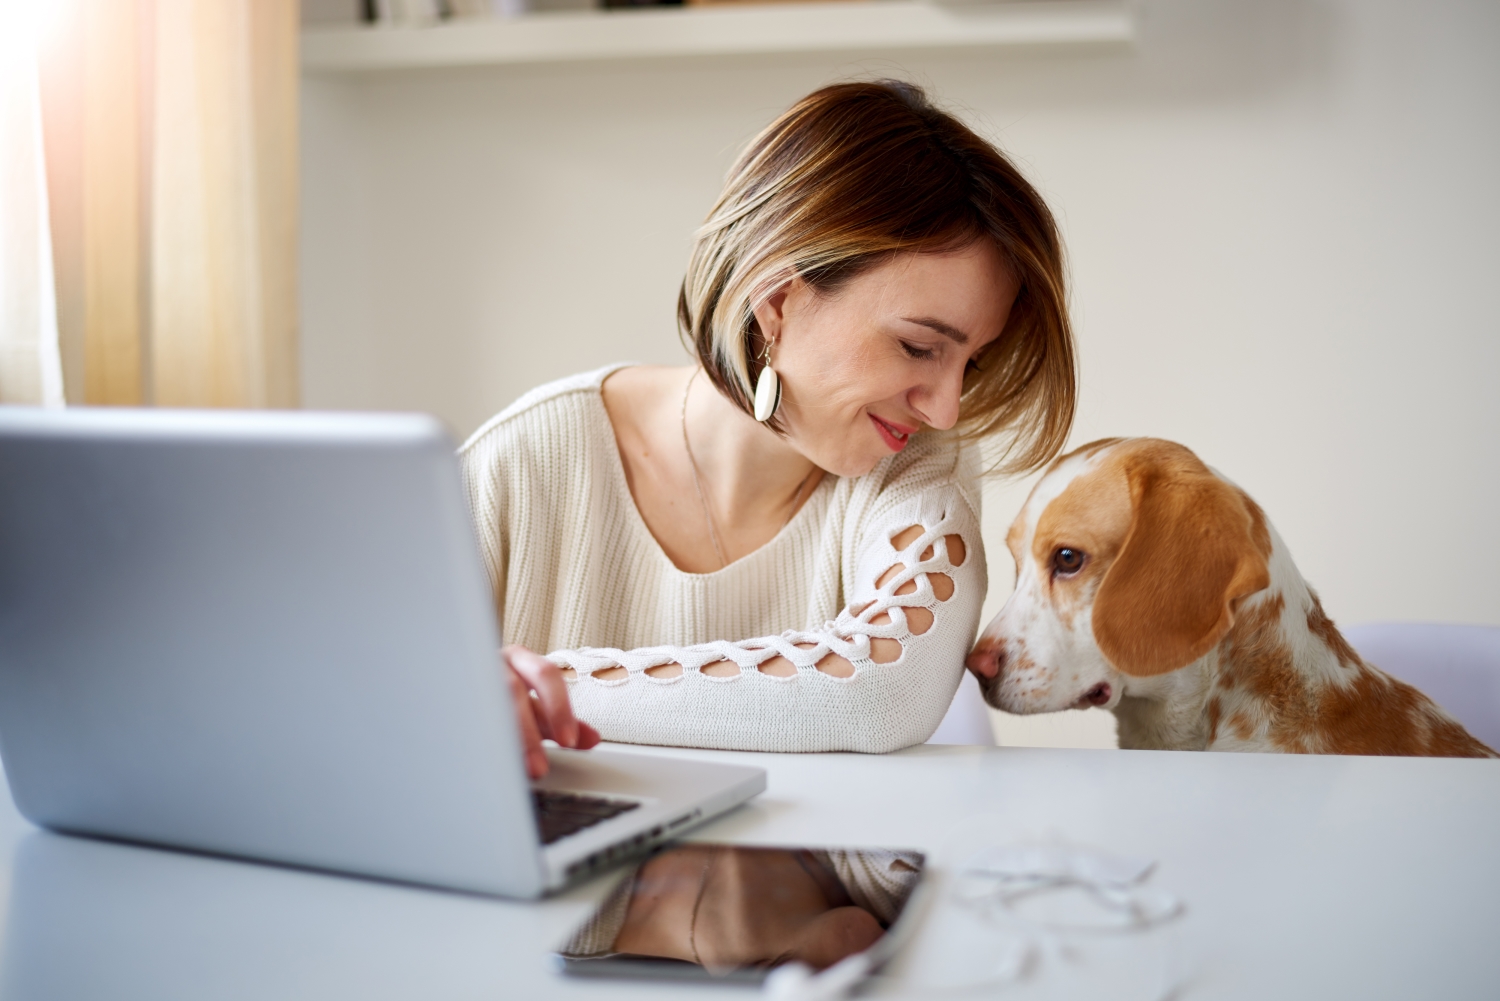 This is image of a brilliant and cheerful business professional, with her dog